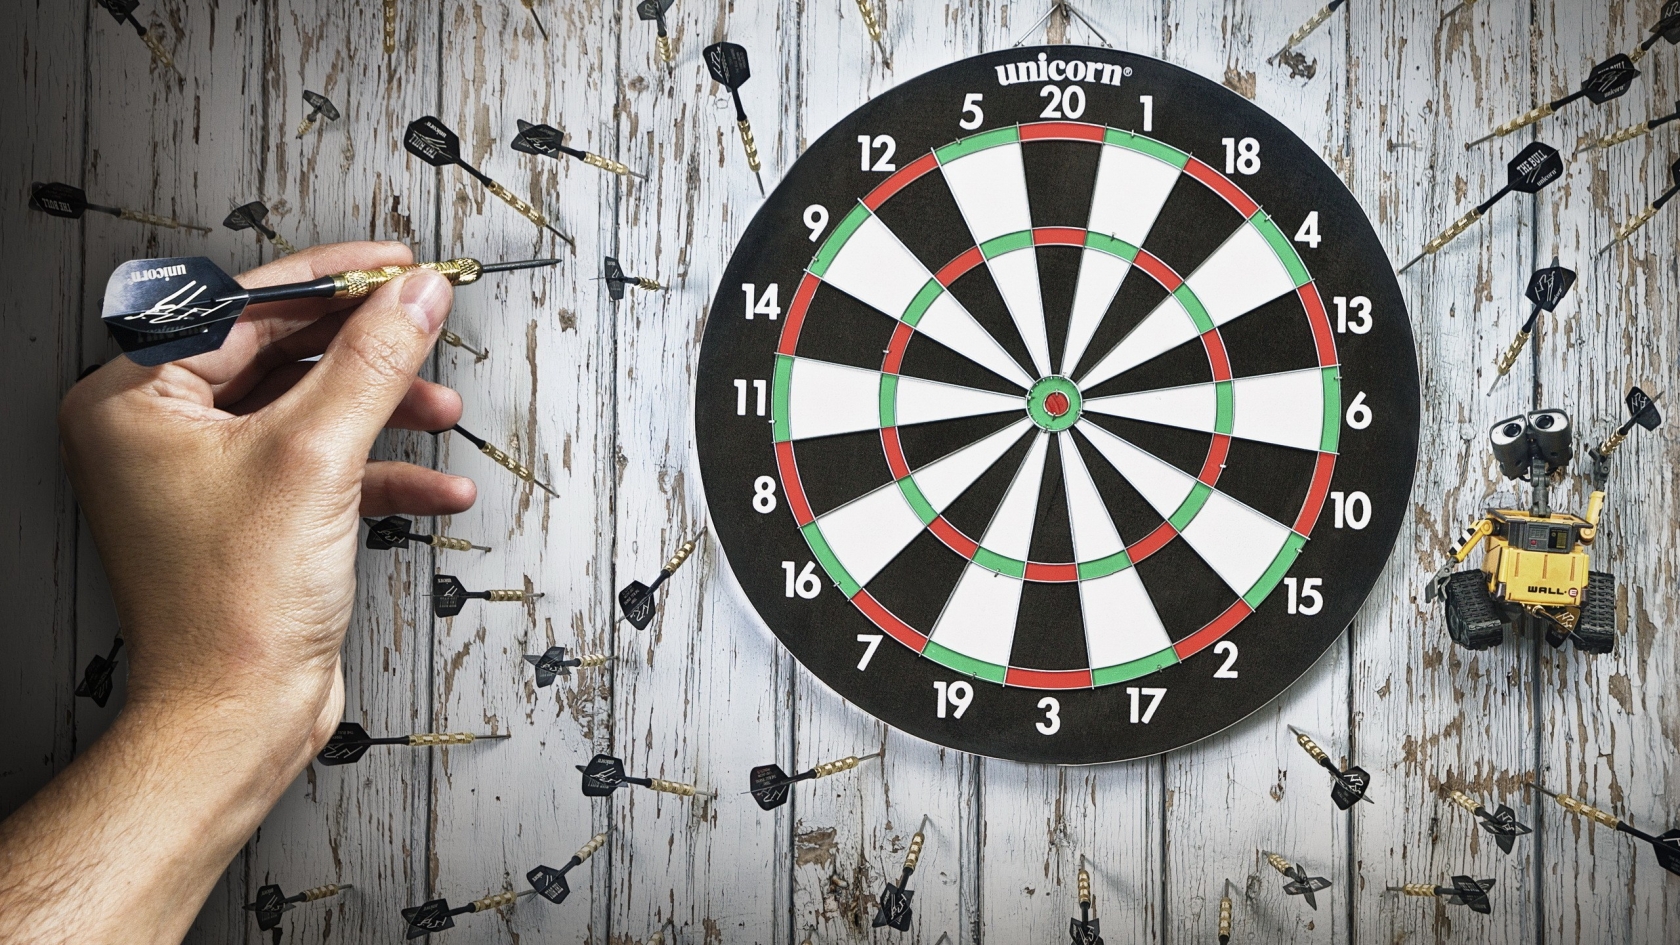 Darts Game for 1680 x 945 HDTV resolution